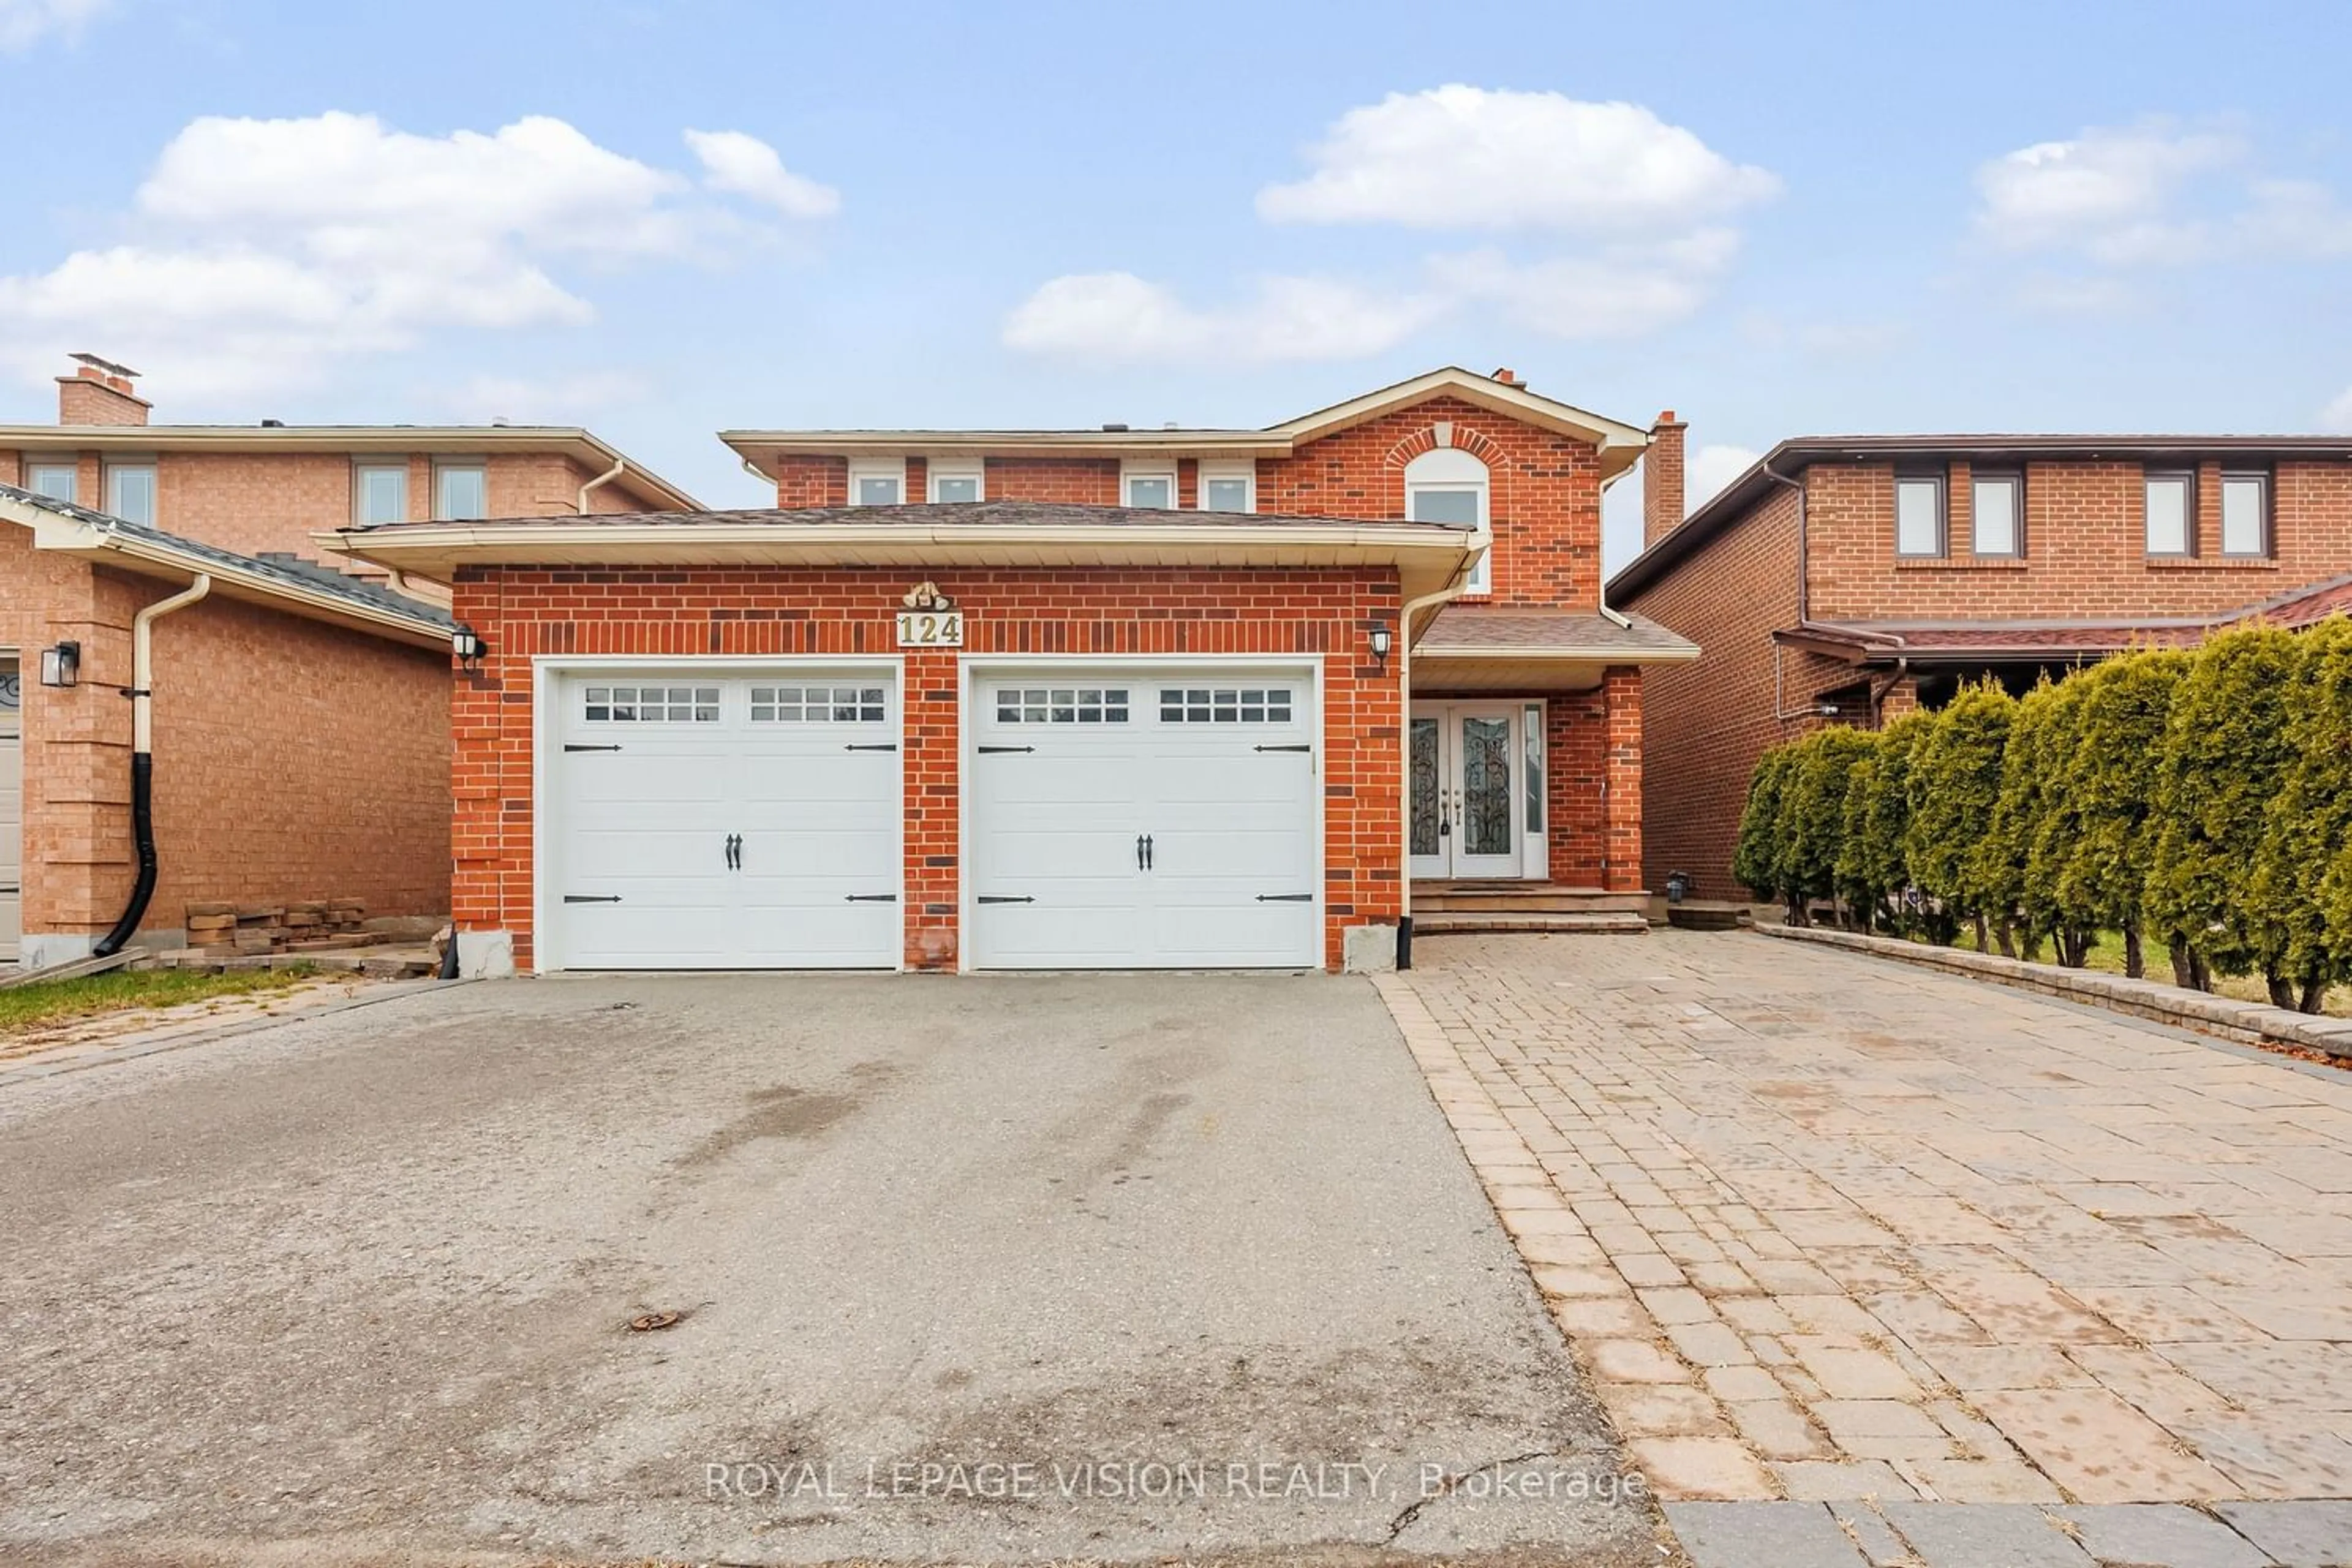 Home with brick exterior material for 124 Lamar St, Vaughan Ontario L6A 1A6